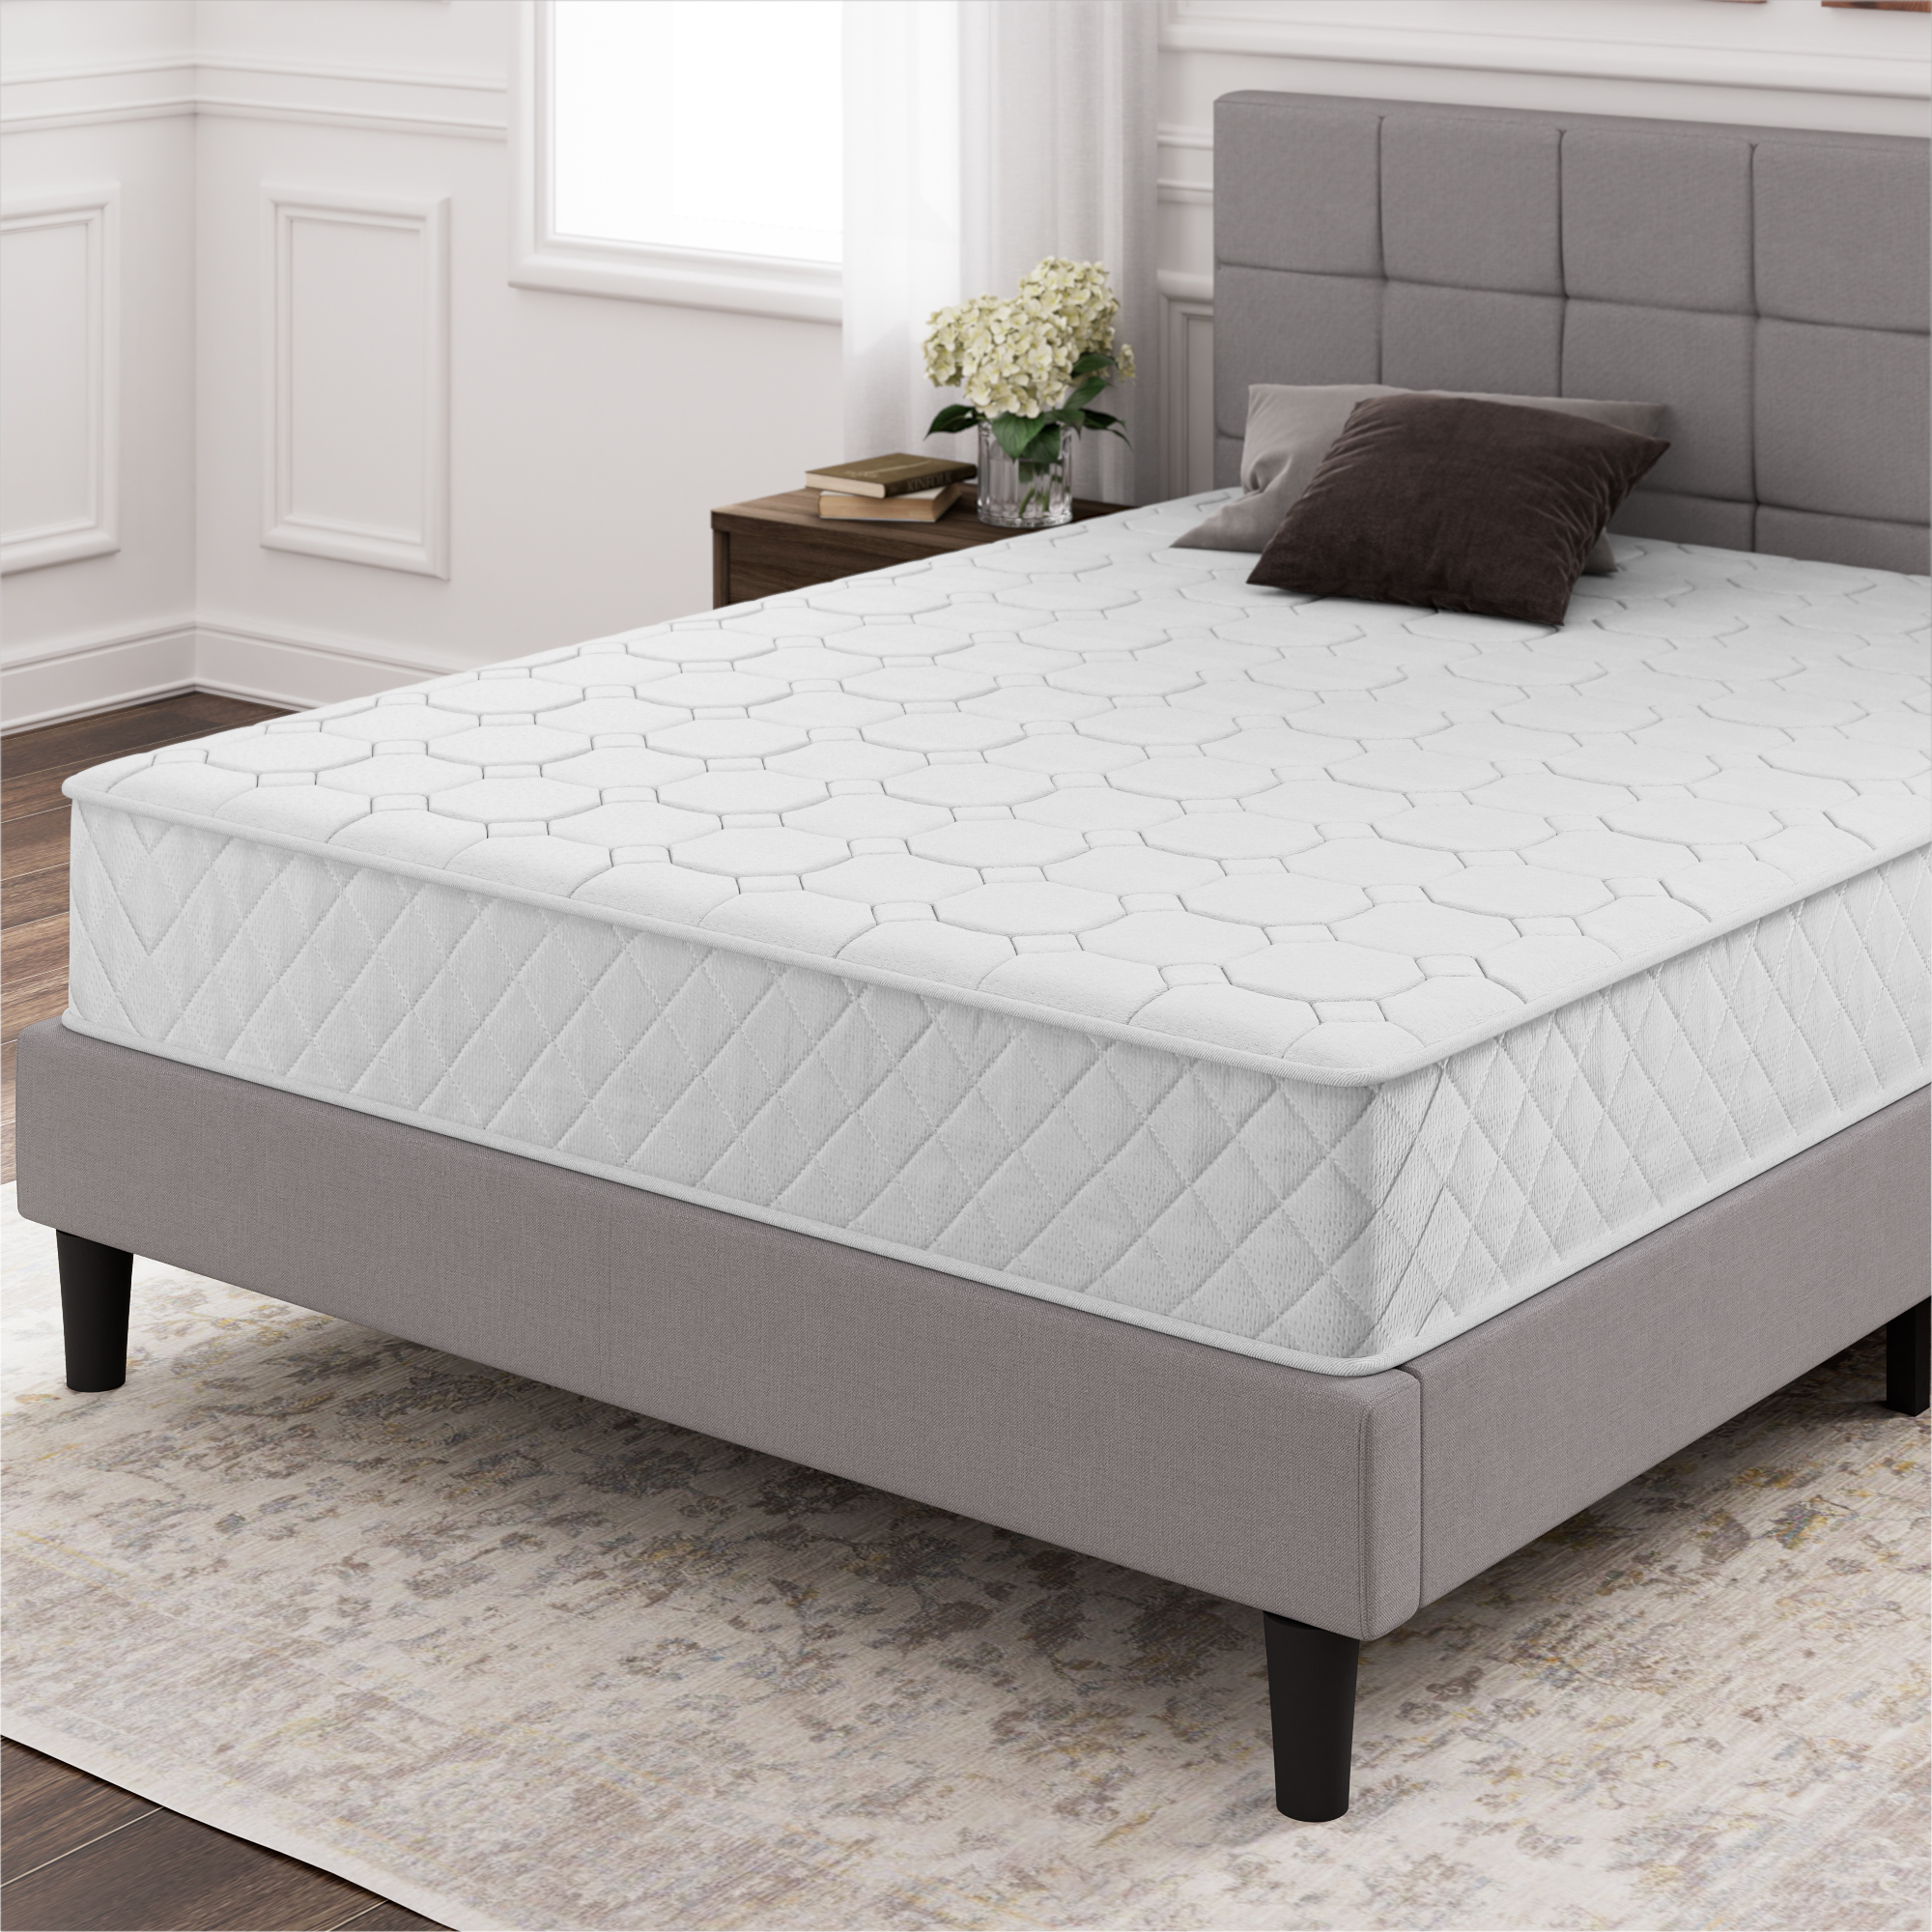 8" Quilted Hybrid of Comfort Foam and Pocket Spring Mattress, Twin - image 5 of 5